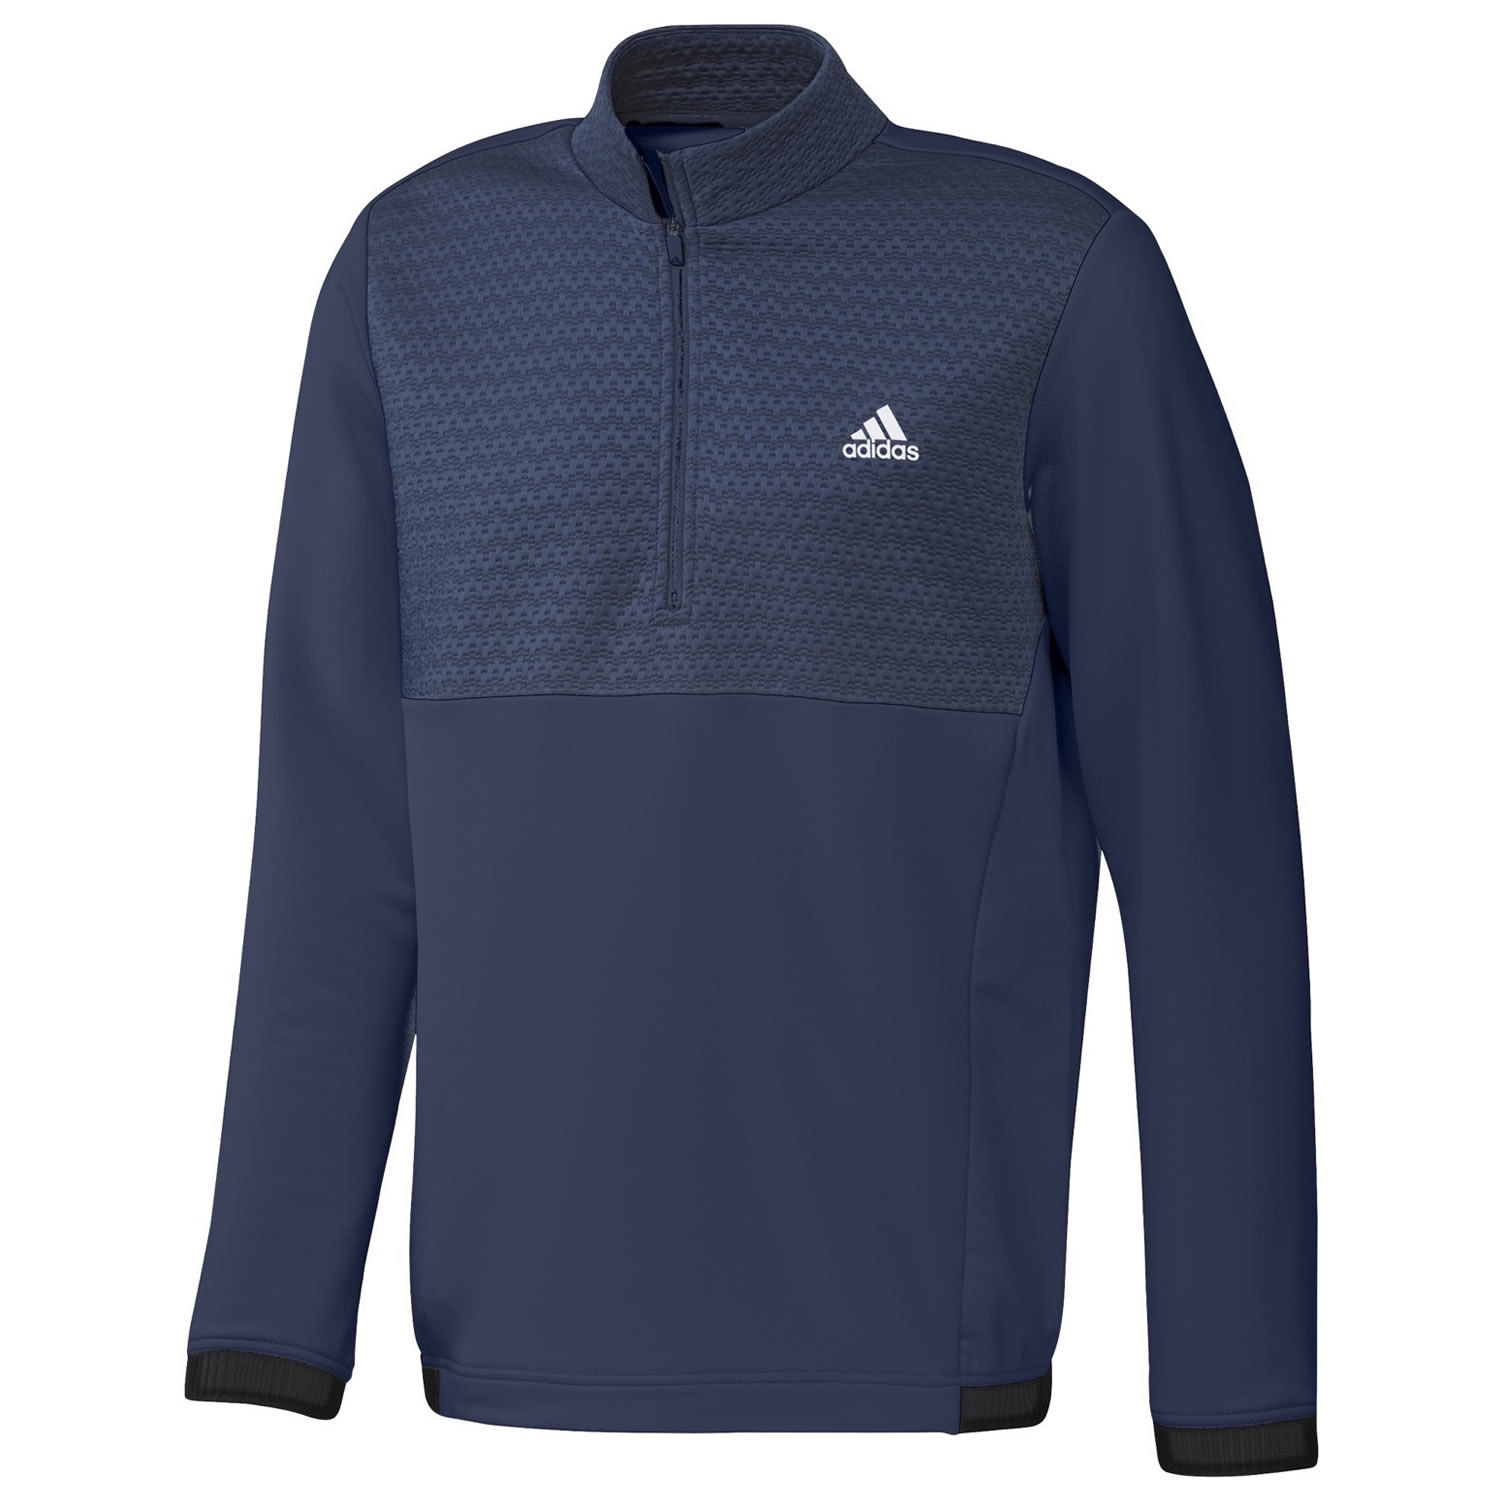 adidas COLD.RDY Zip Neck Sweater